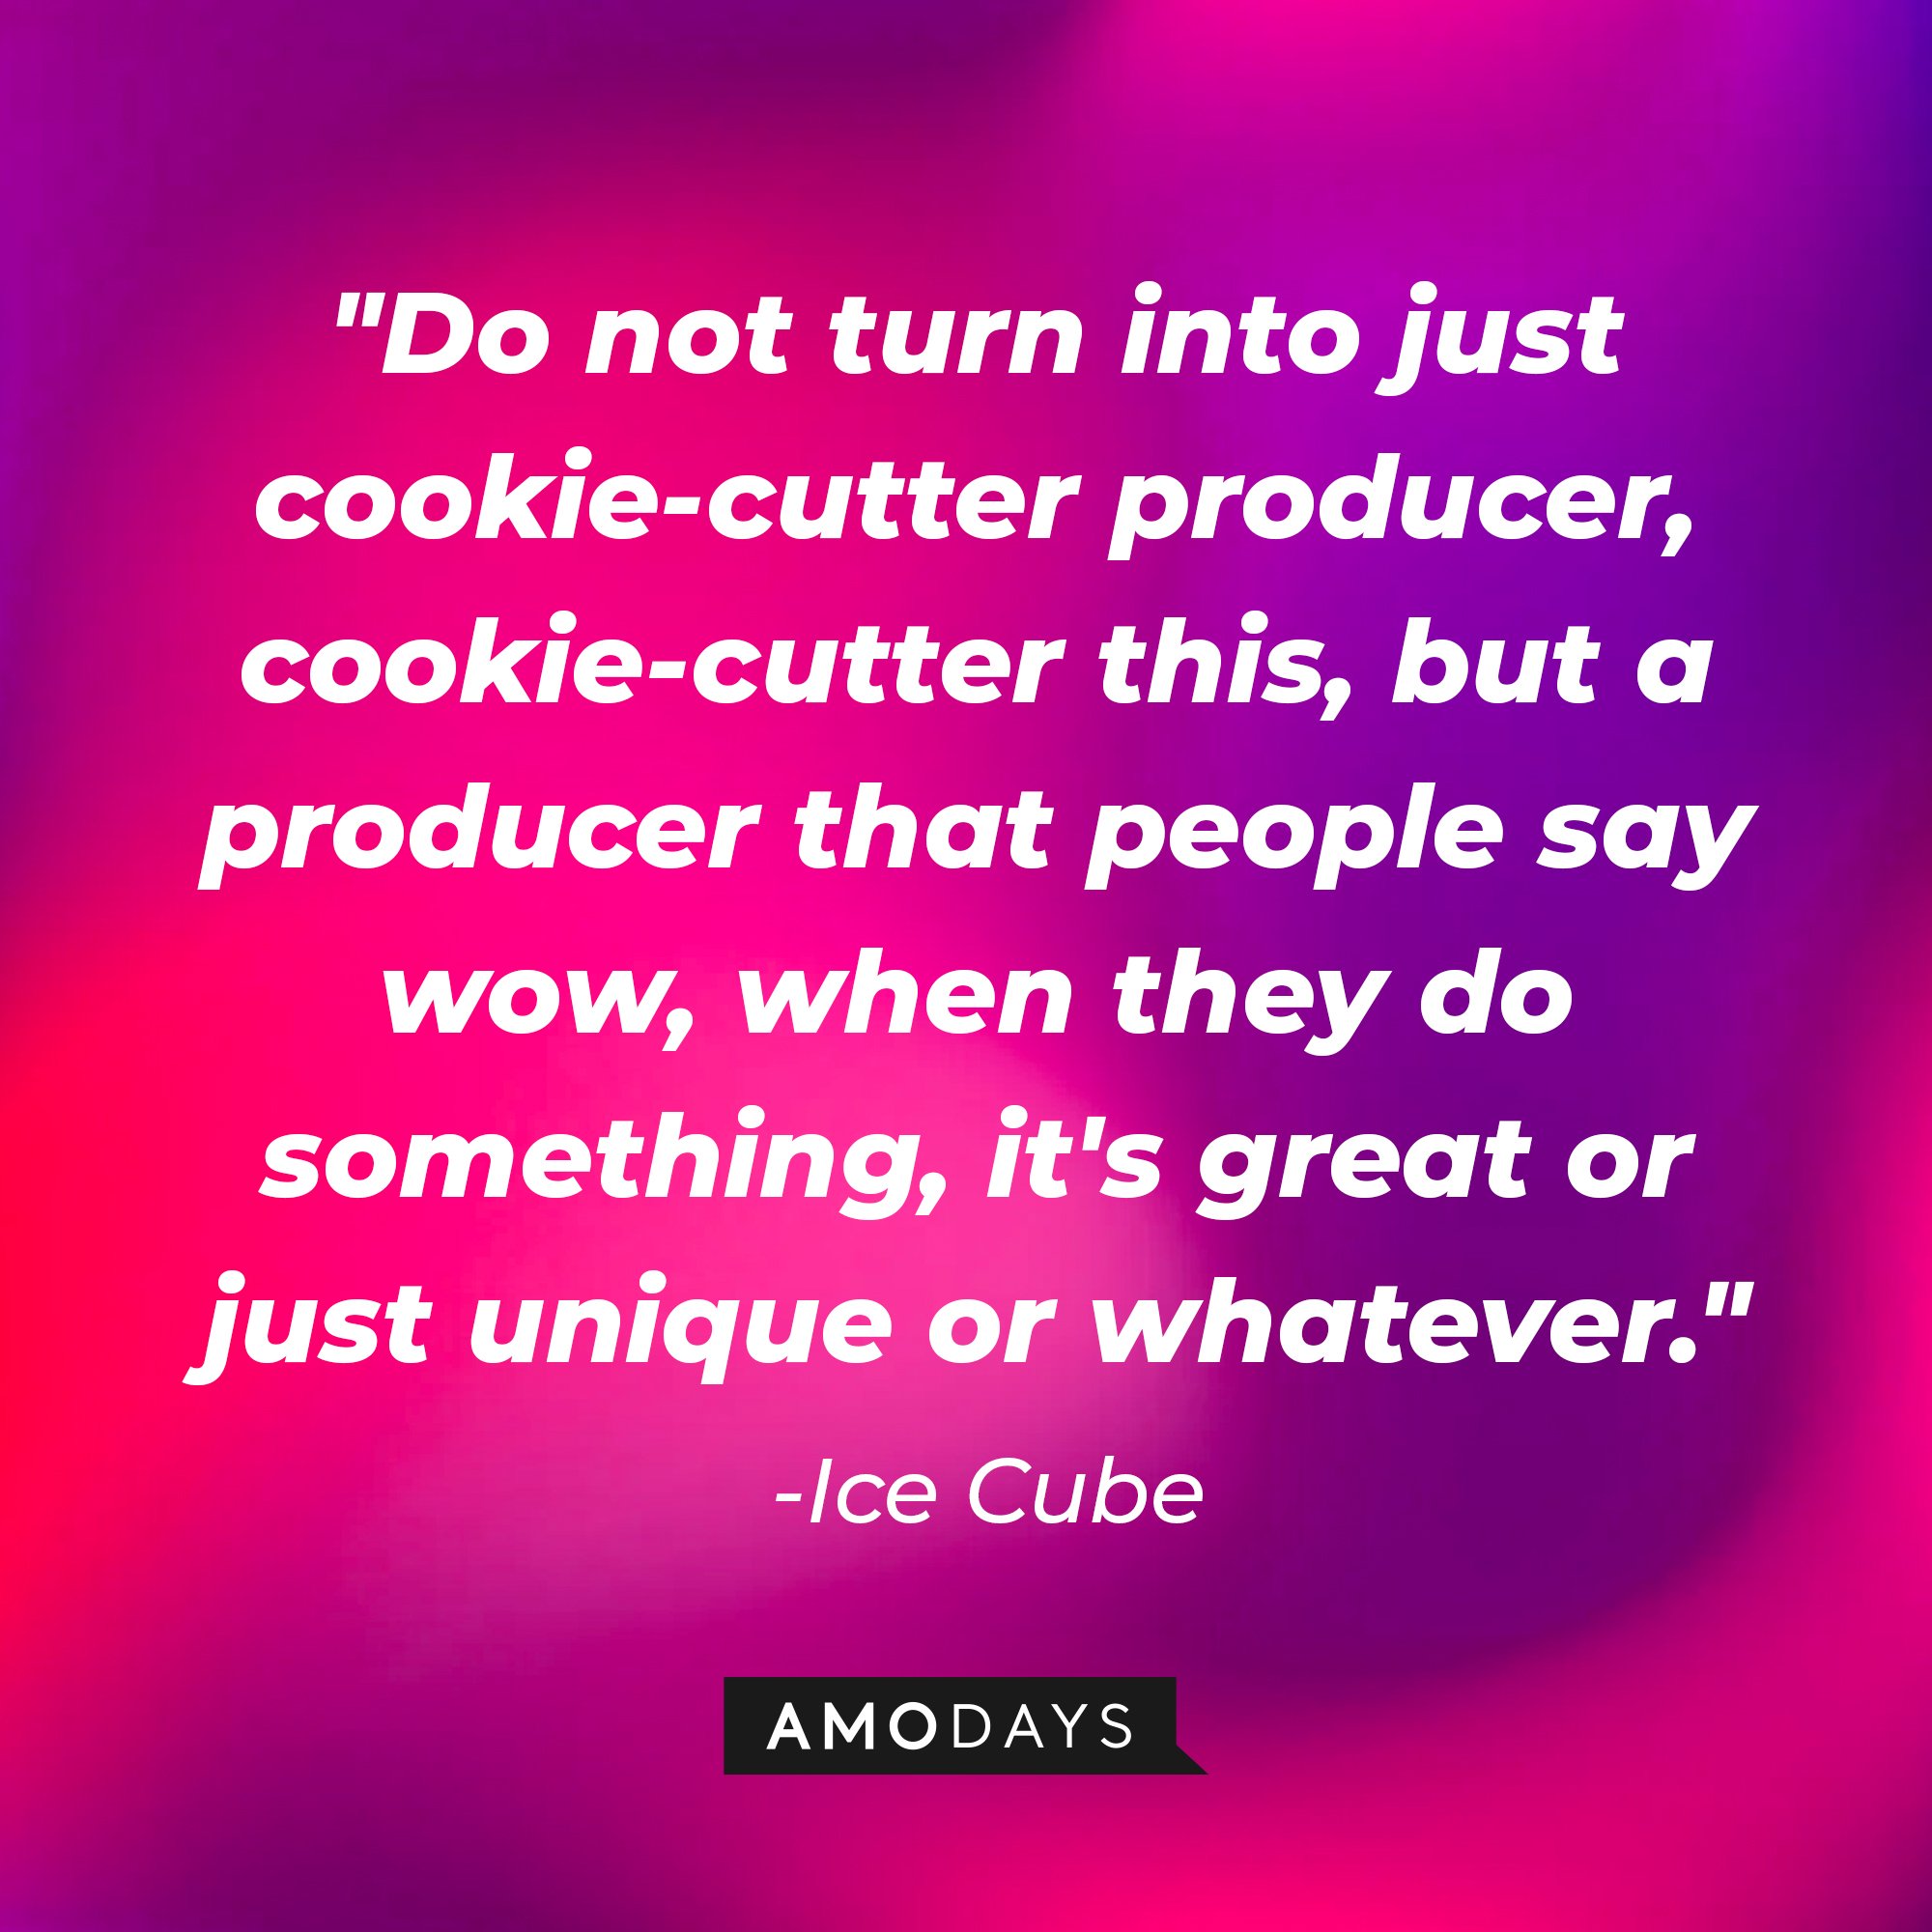 Ice Cube's quote: "Do not turn into just cookie-cutter producer, cookie-cutter this, but a producer that people say wow, when they do something, it's great or just unique or whatever." — Ice Cube | Image: AmoDays